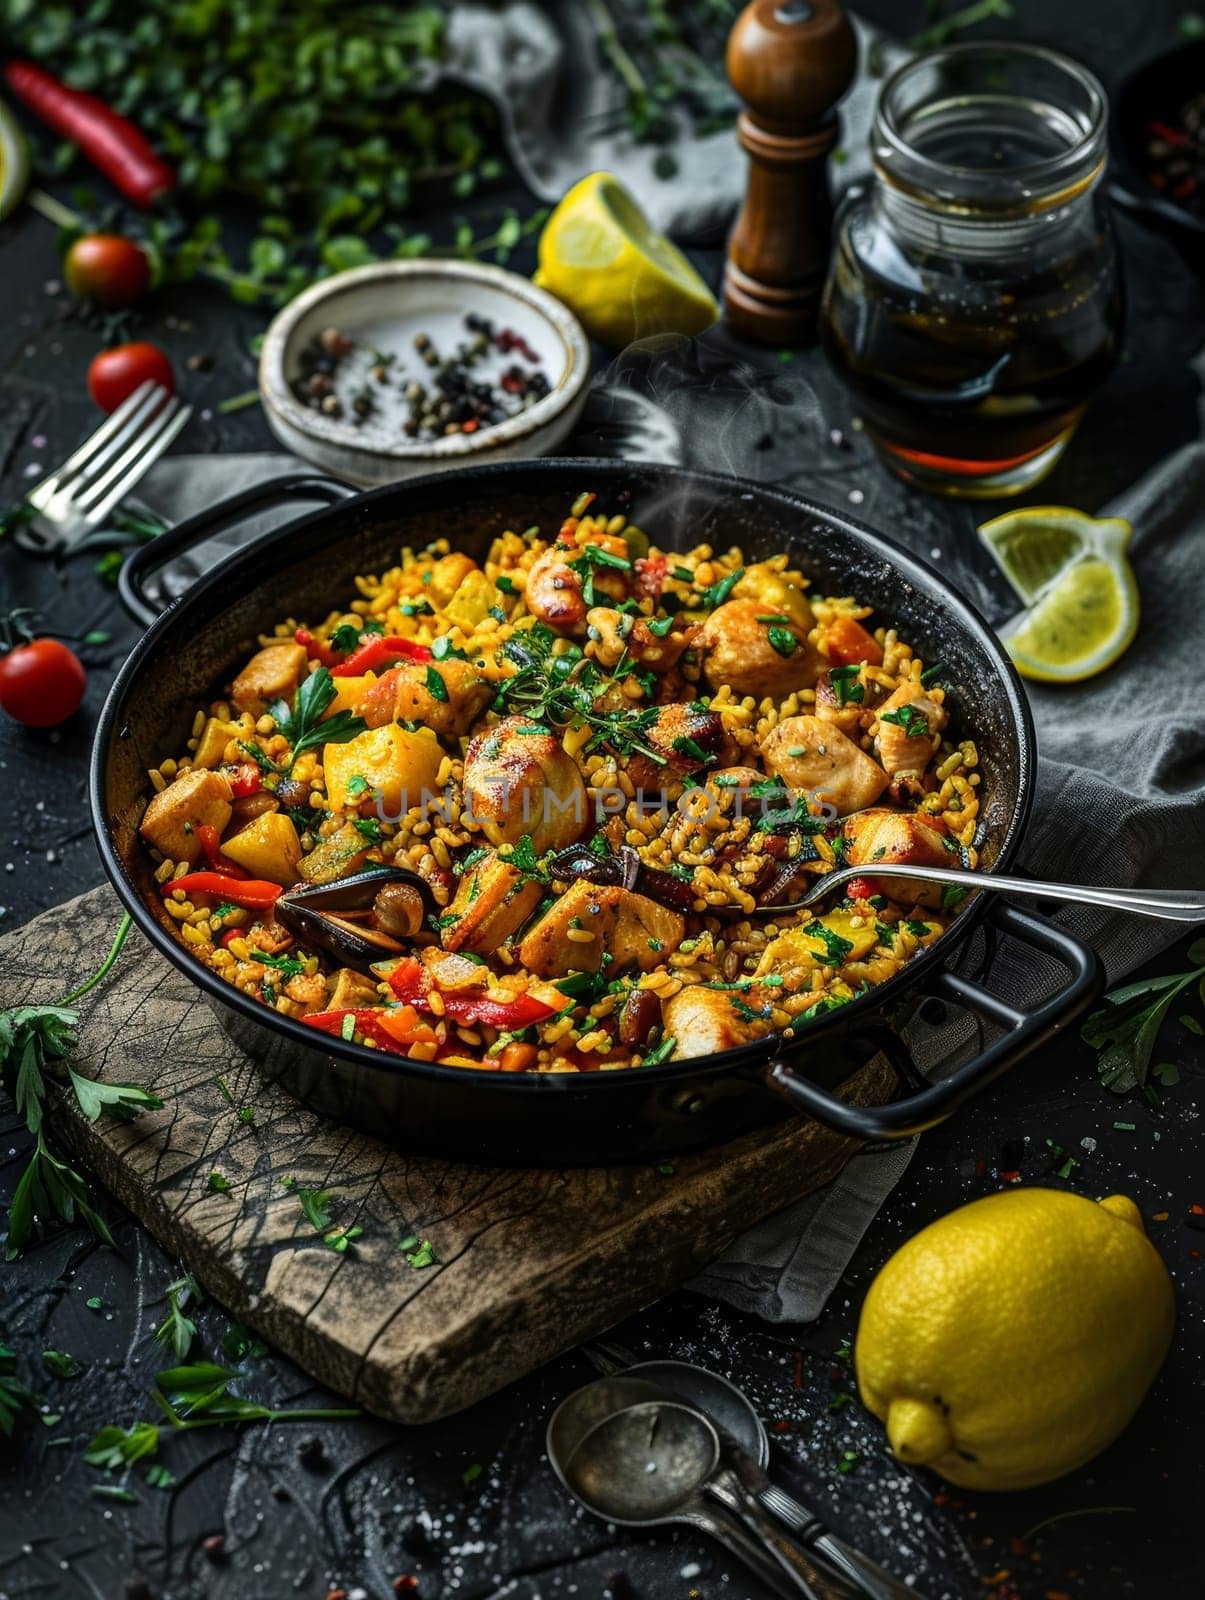 Authentic Spanish paella with seafood, chicken, and saffron rice, cooked in a traditional paella pan. A delicious and colorful dish representing the flavors of Spain